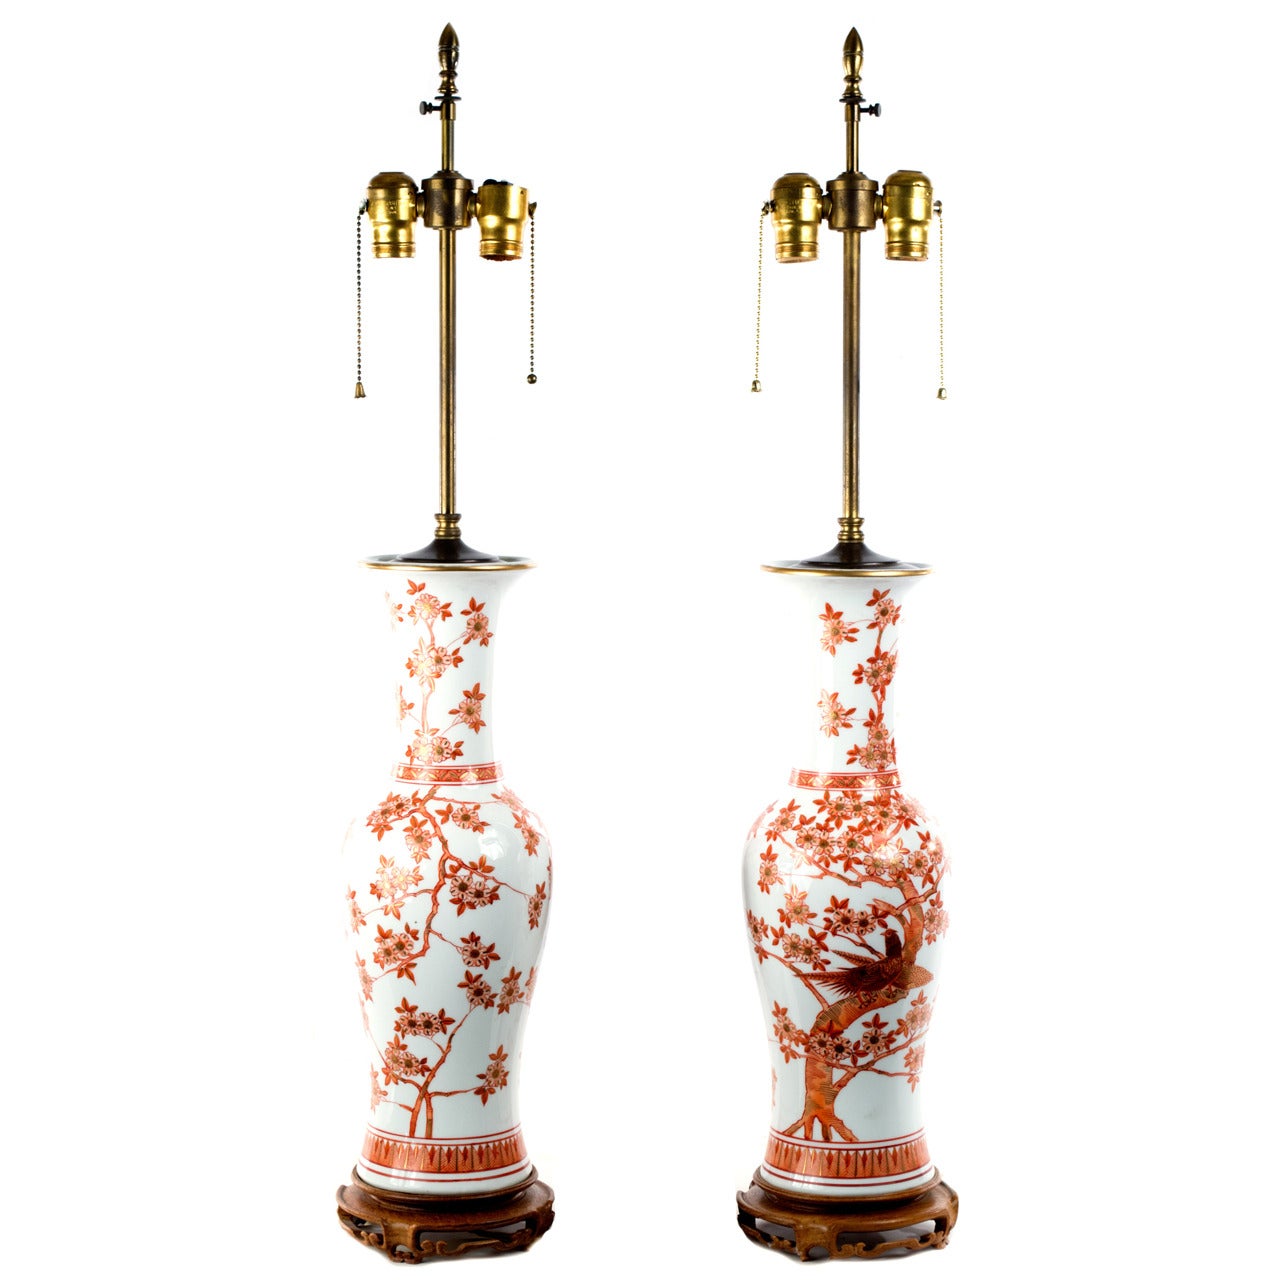 Pair of Large Lamped Baluster Vases